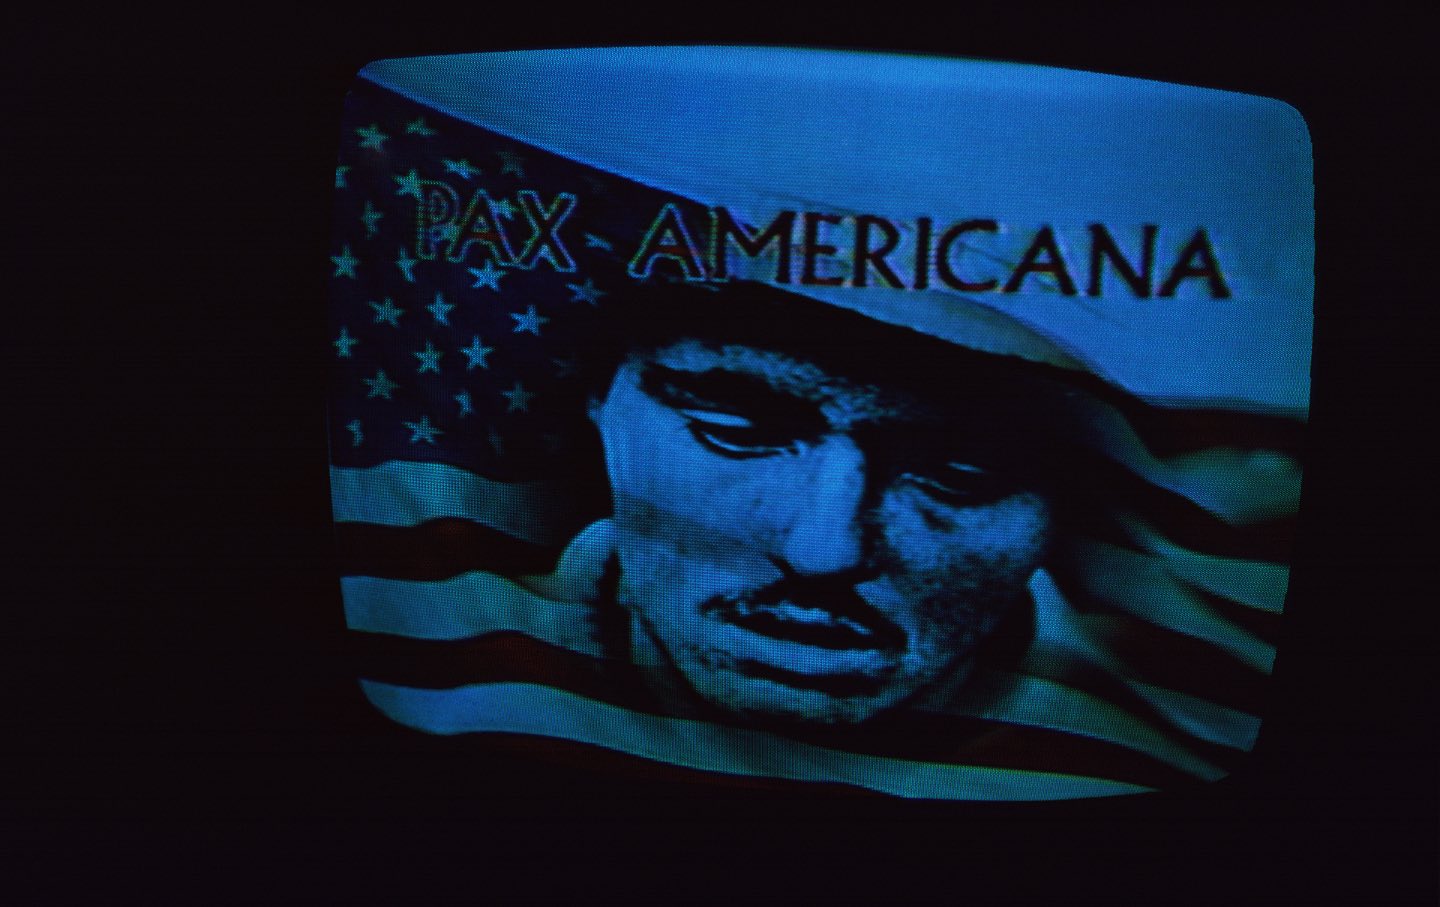 television screen with soldier and american flag; pax americana